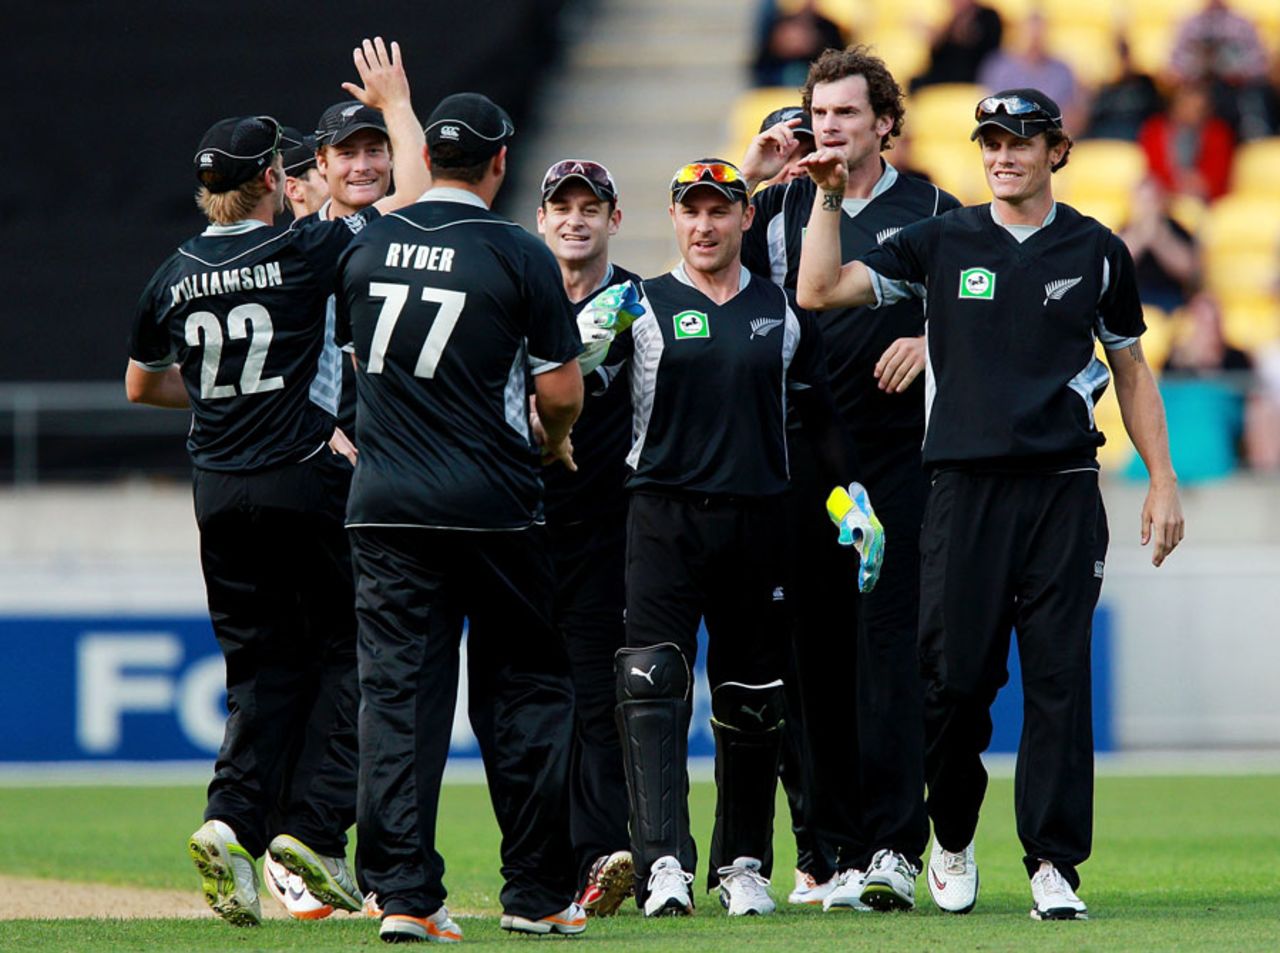 New Zealand get together after a wicket, New Zealand v South Africa, 1st ODI , Wellington, February 25, 2012